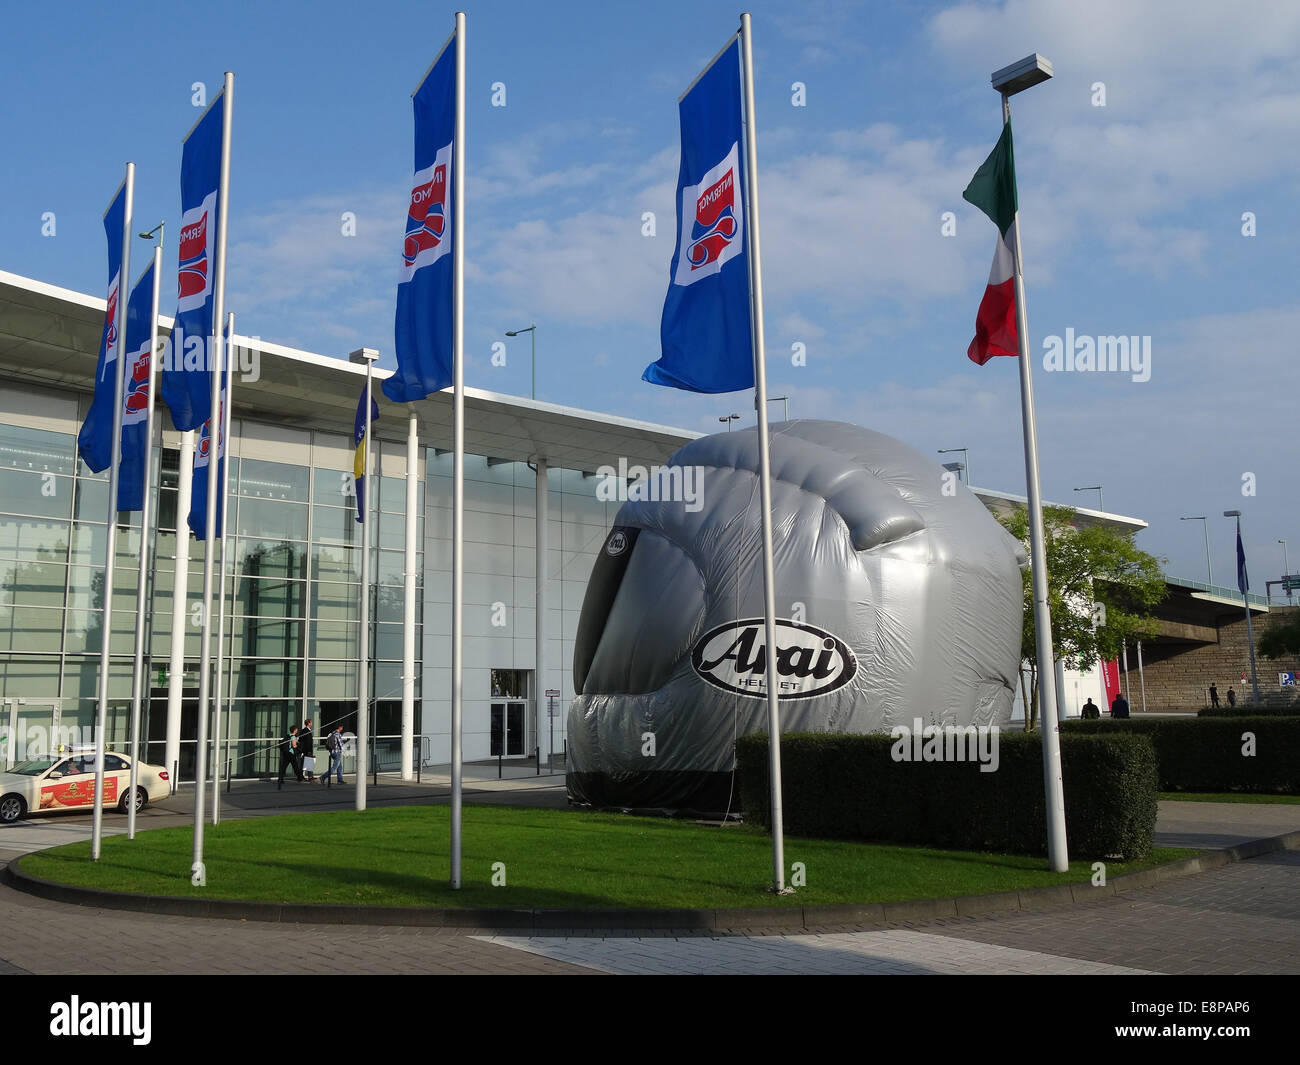 The Flags and the Head Shelter to Intermot 2014 in front of the Fair Halls in Cologne Stock Photo